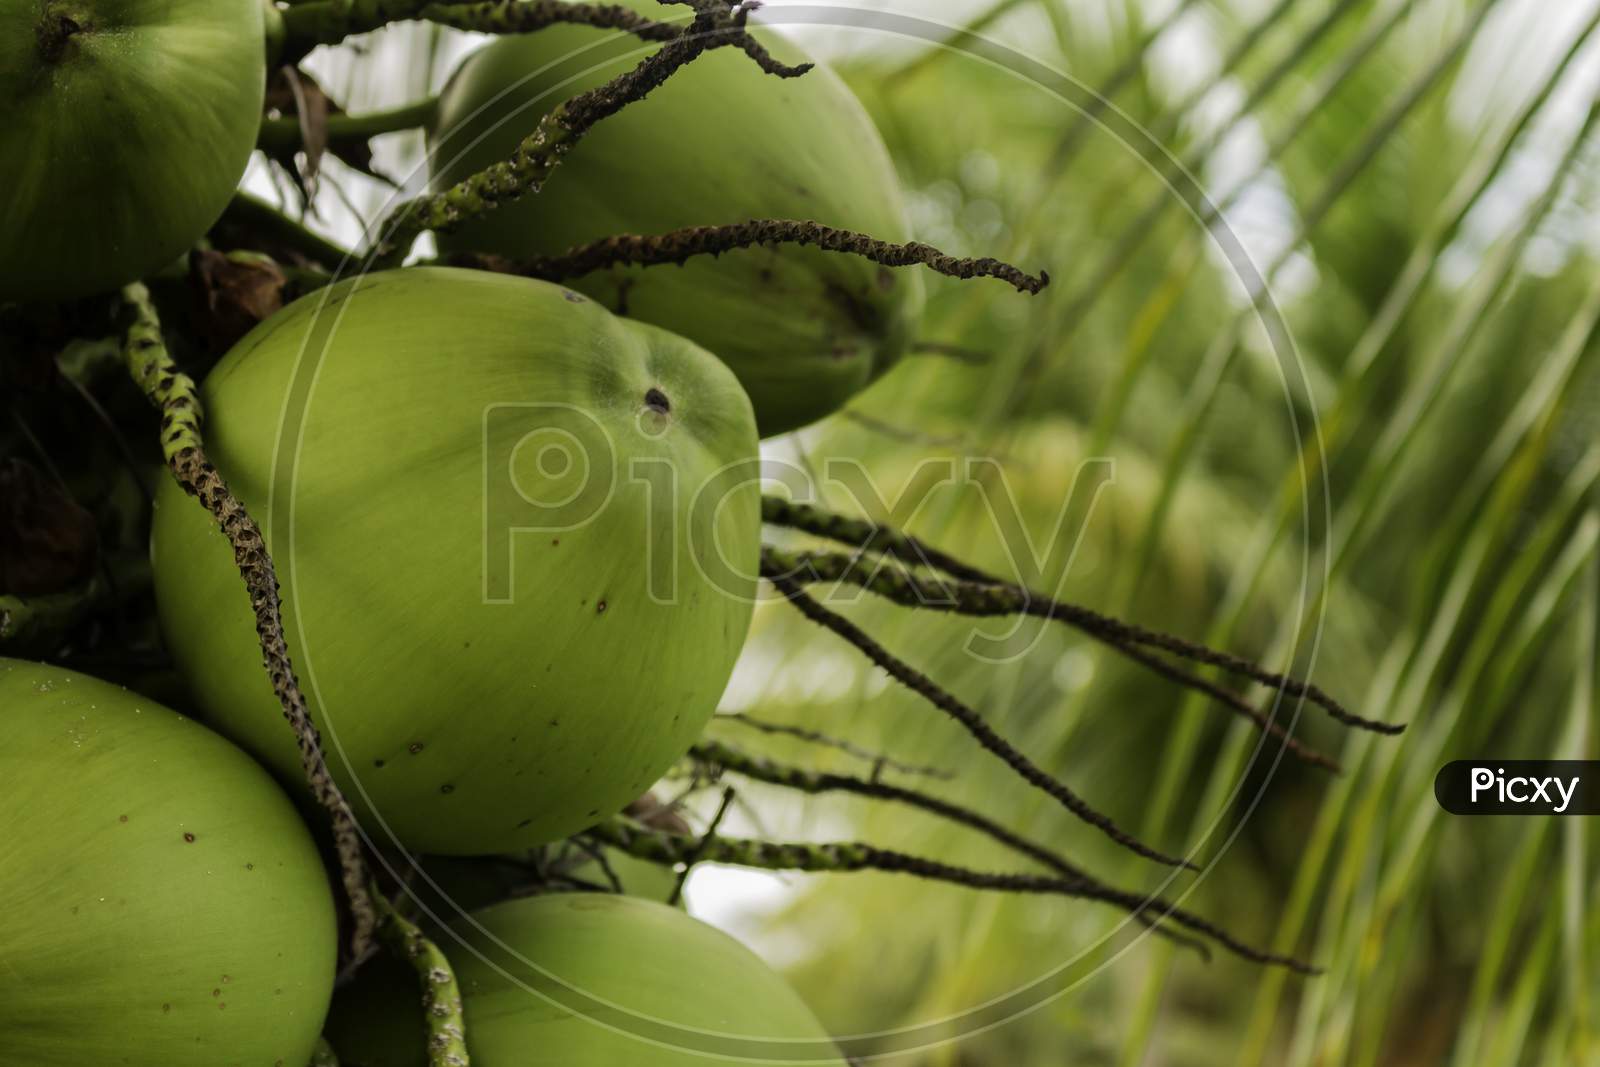 Posy Of Coconuts On A Palm Tree. Round Fruit Of Green Color With Water Inside. Nutritious Food Of Vegetable Origin. Plants For The Production Of Coconut Oil.